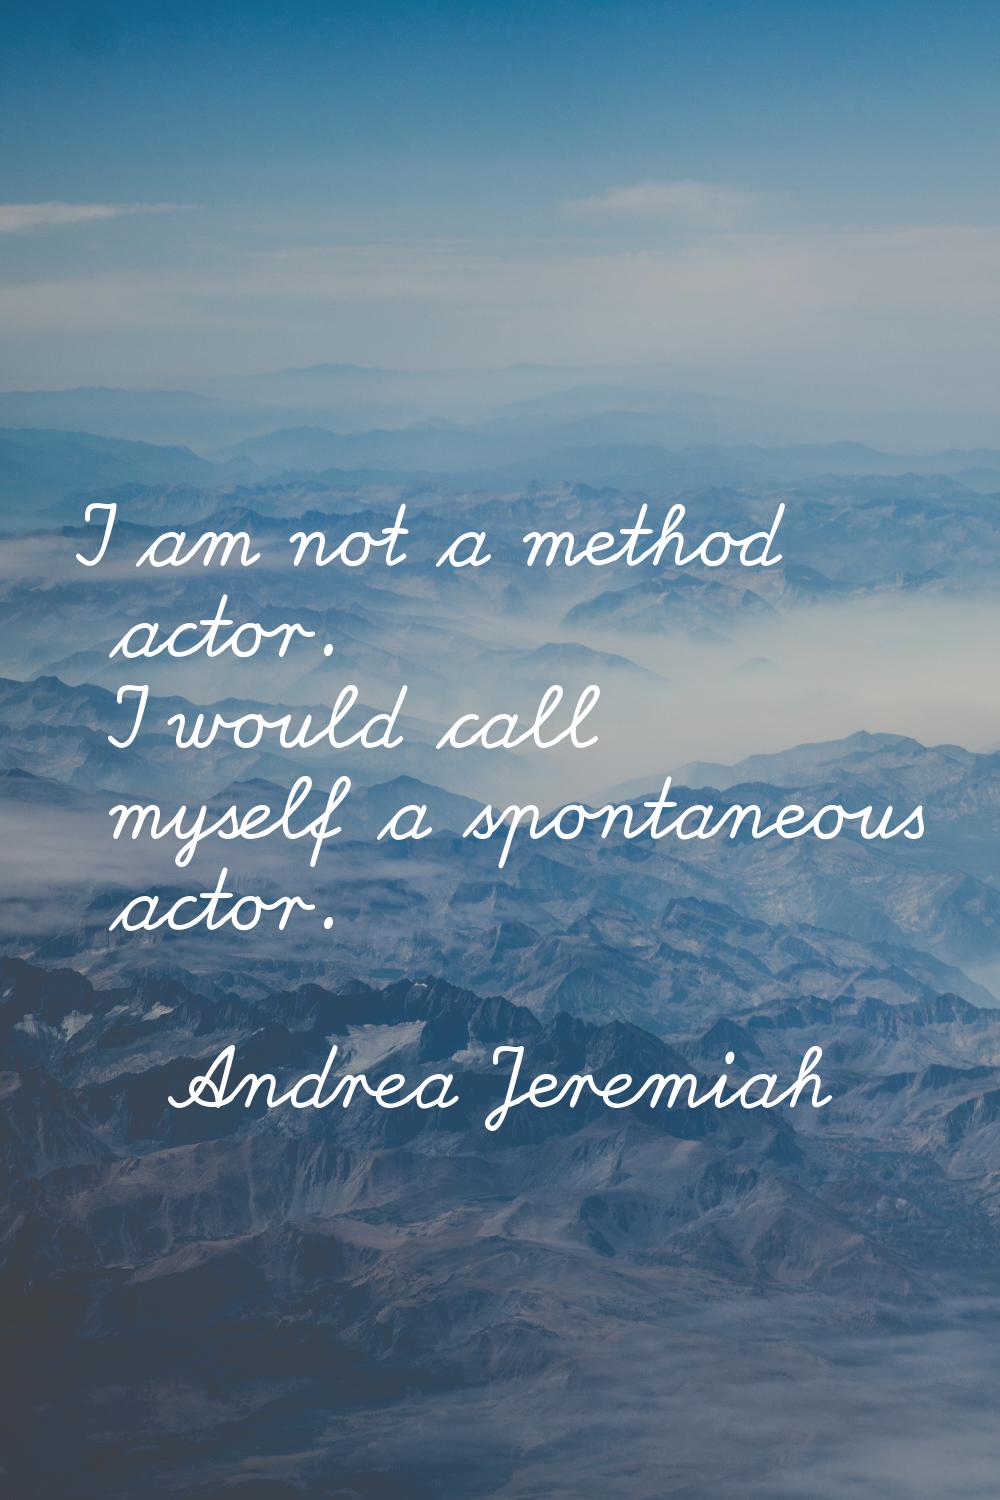 I am not a method actor. I would call myself a spontaneous actor.